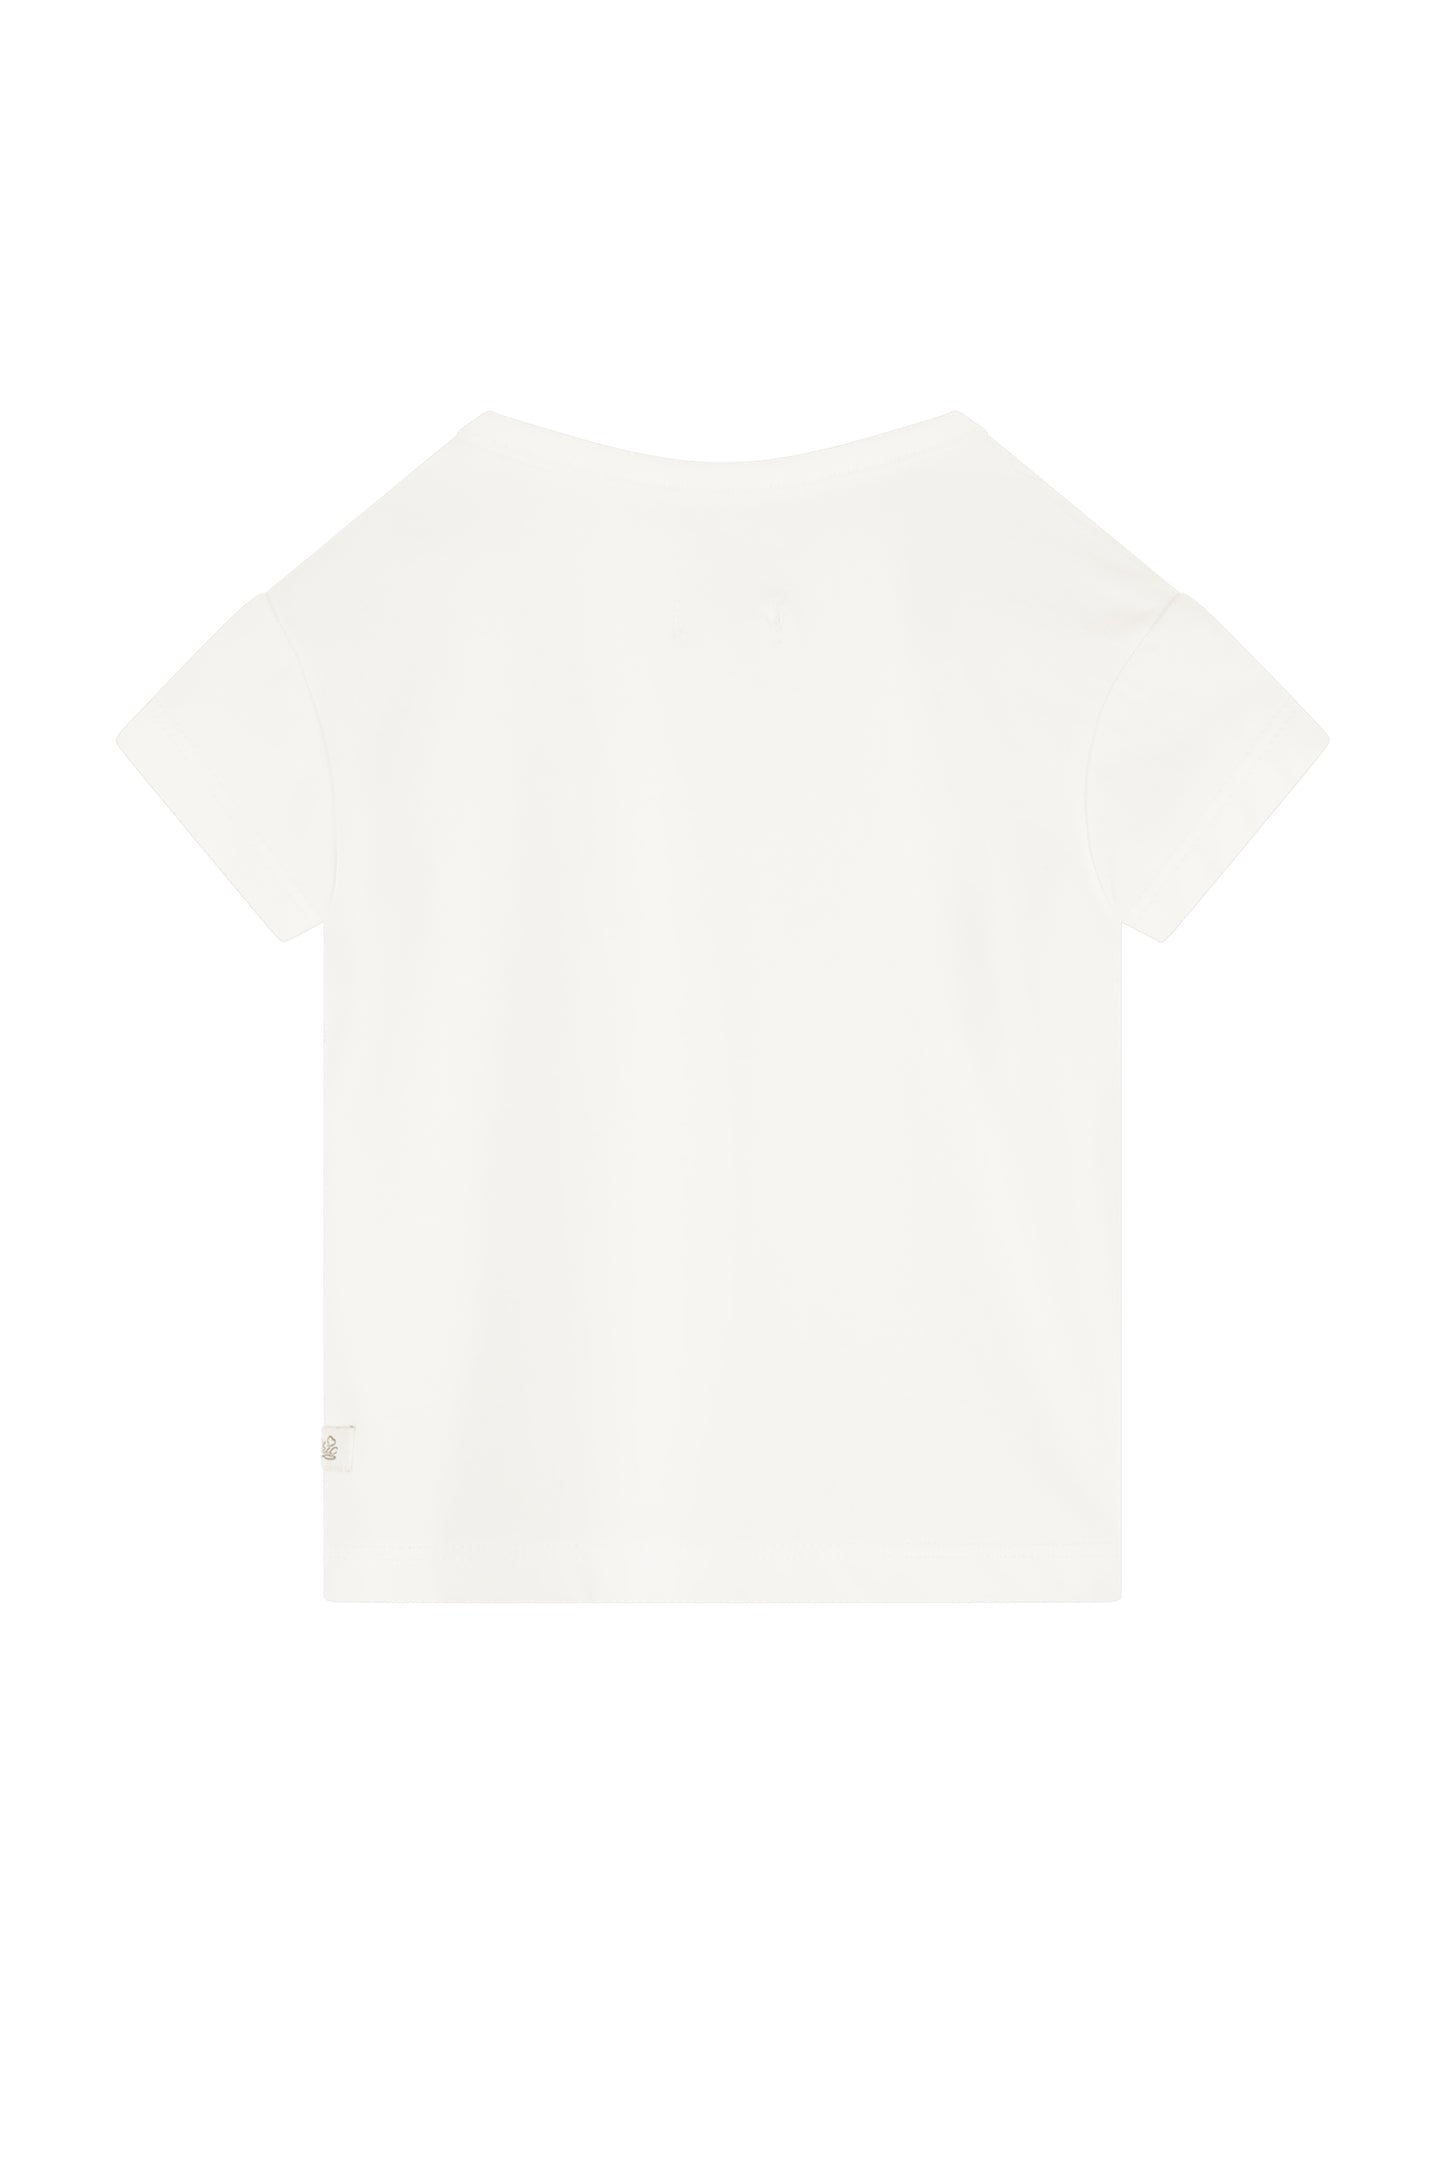 || Le Chic || T-shirt met glinster - NORLY